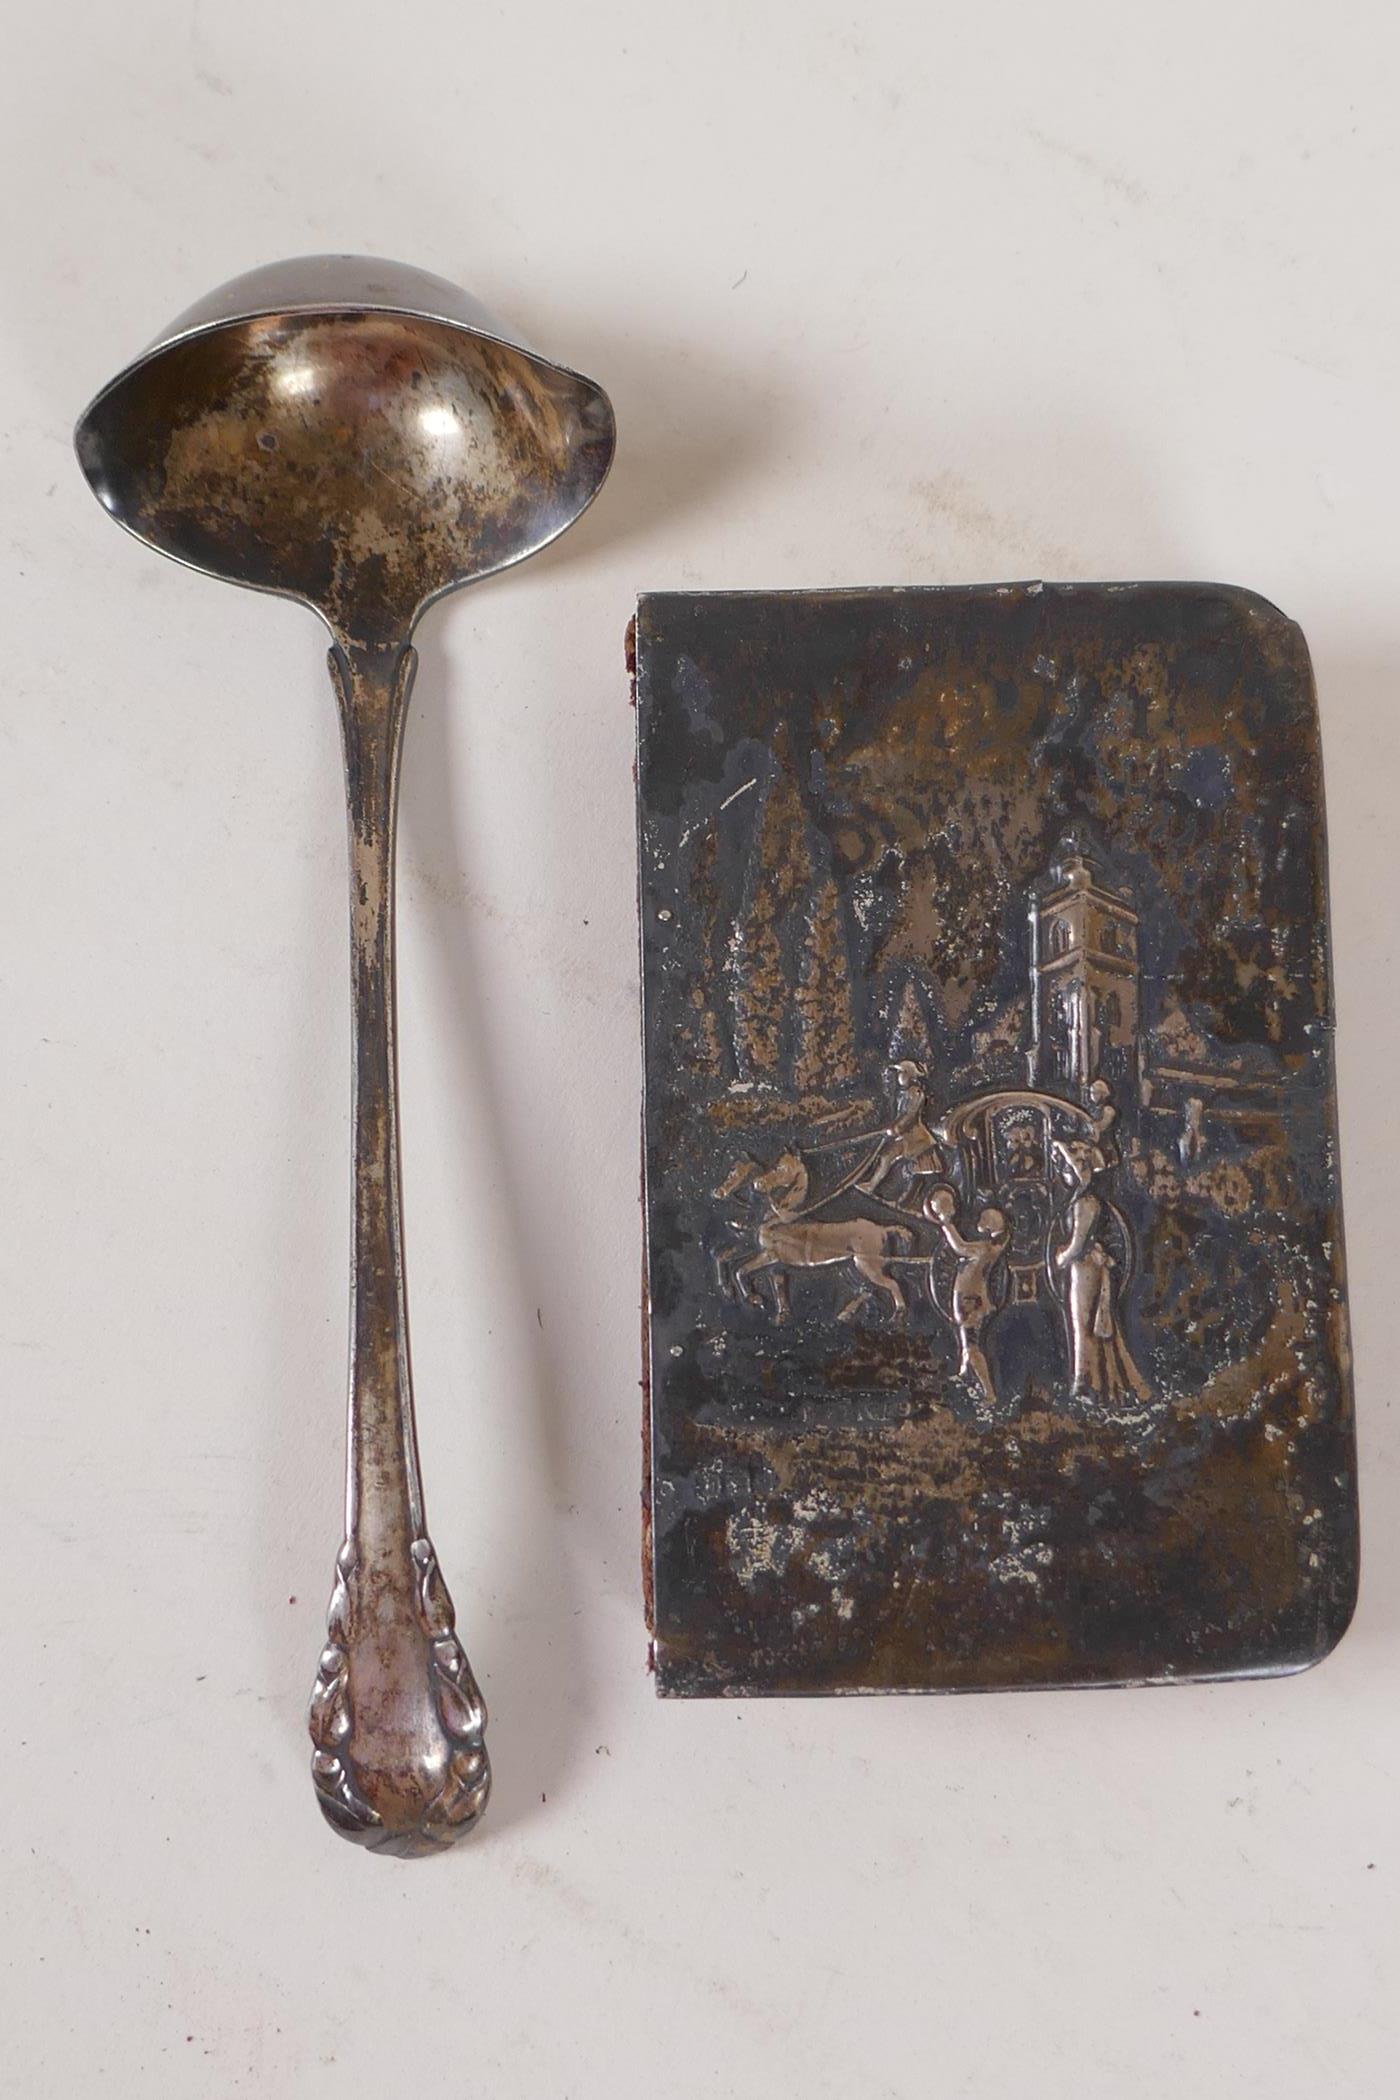 A Continental 925 silver brandy ladle with London import marks, 30g, and a 'purse' book of common